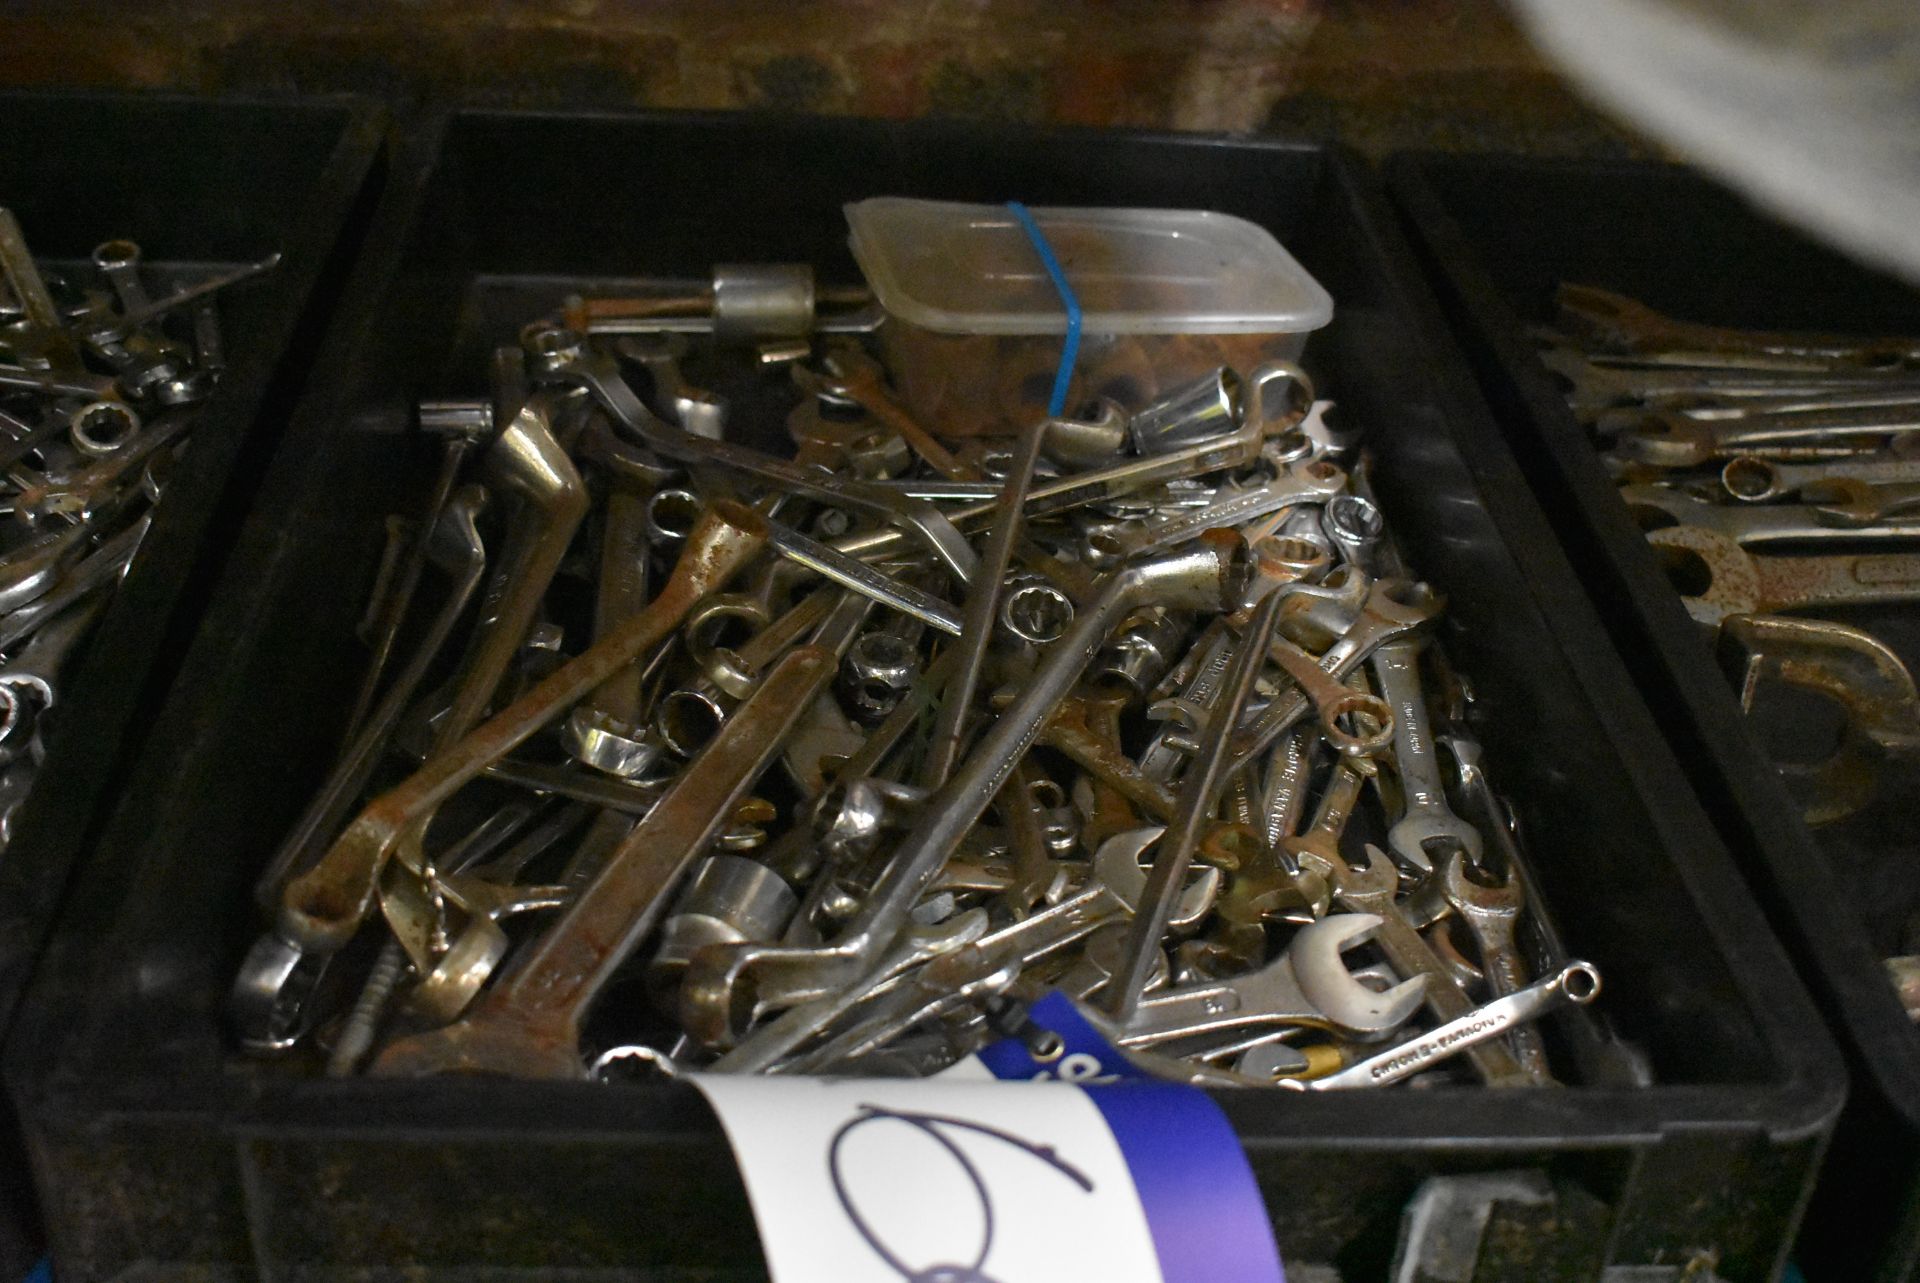 Assorted Metric & Imperial Spanners and Sockets, in plastic tray - Image 2 of 2